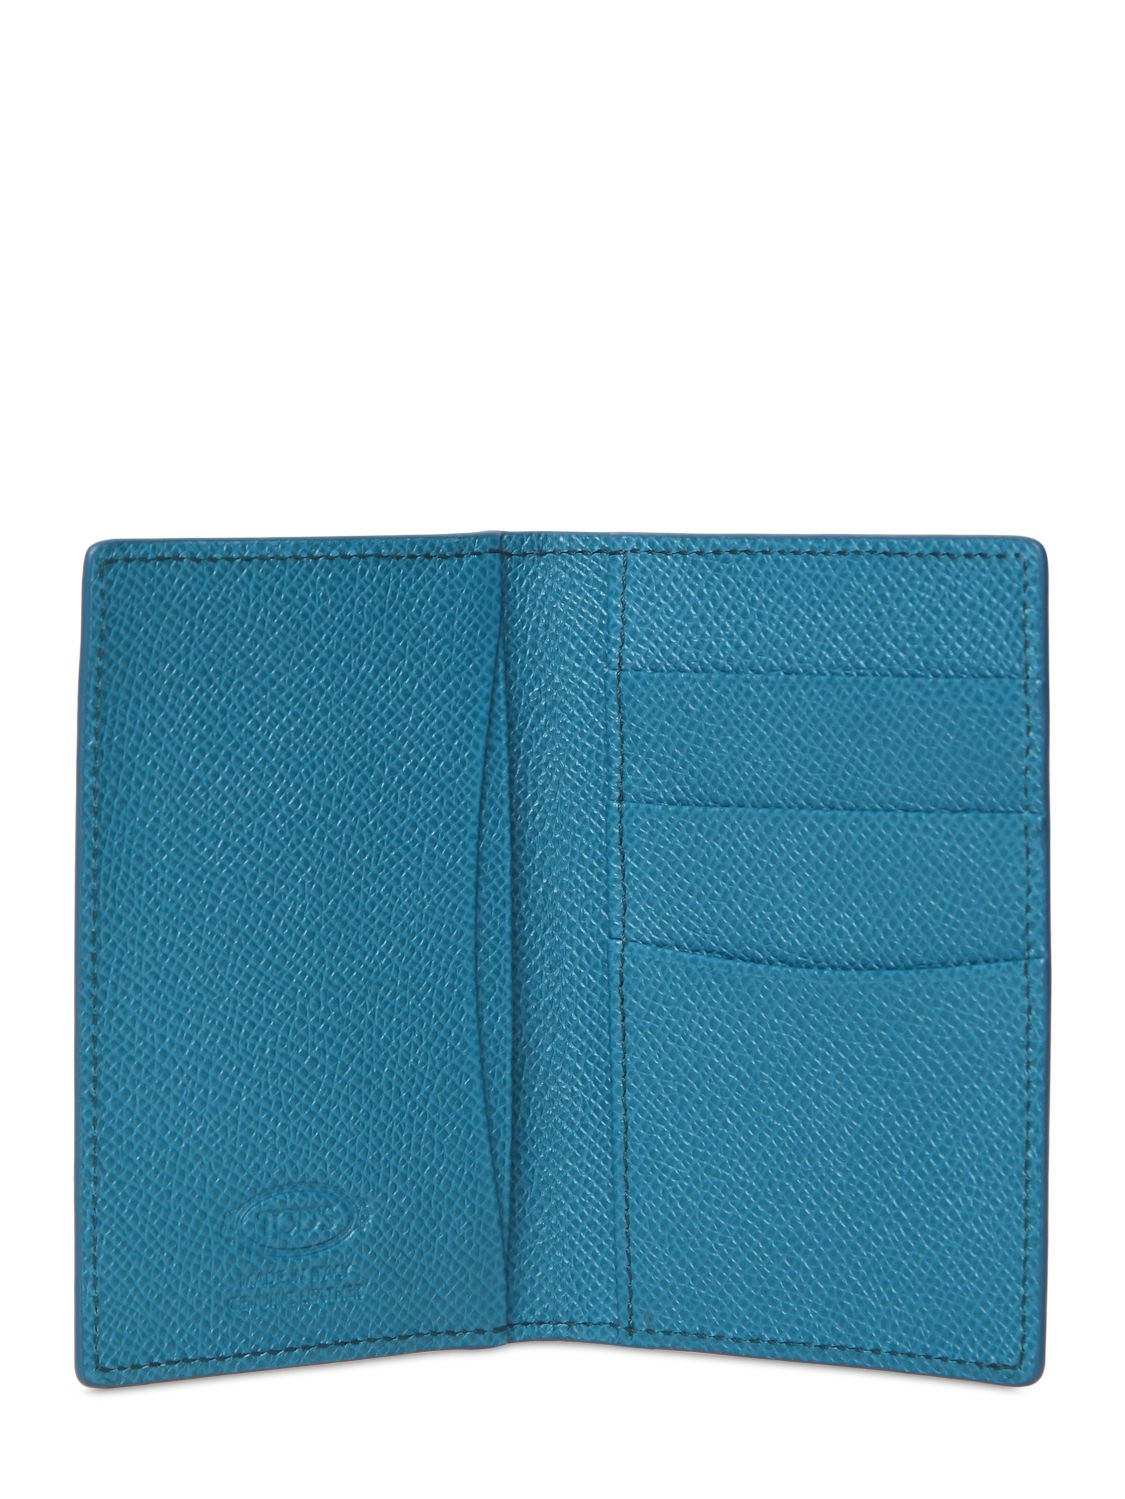 Name:  tods-blue-vertical-grained-leather-card-holder-product-1-16410734-2-403725095-normal.jpeg
Views: 728
Size:  631.9 KB